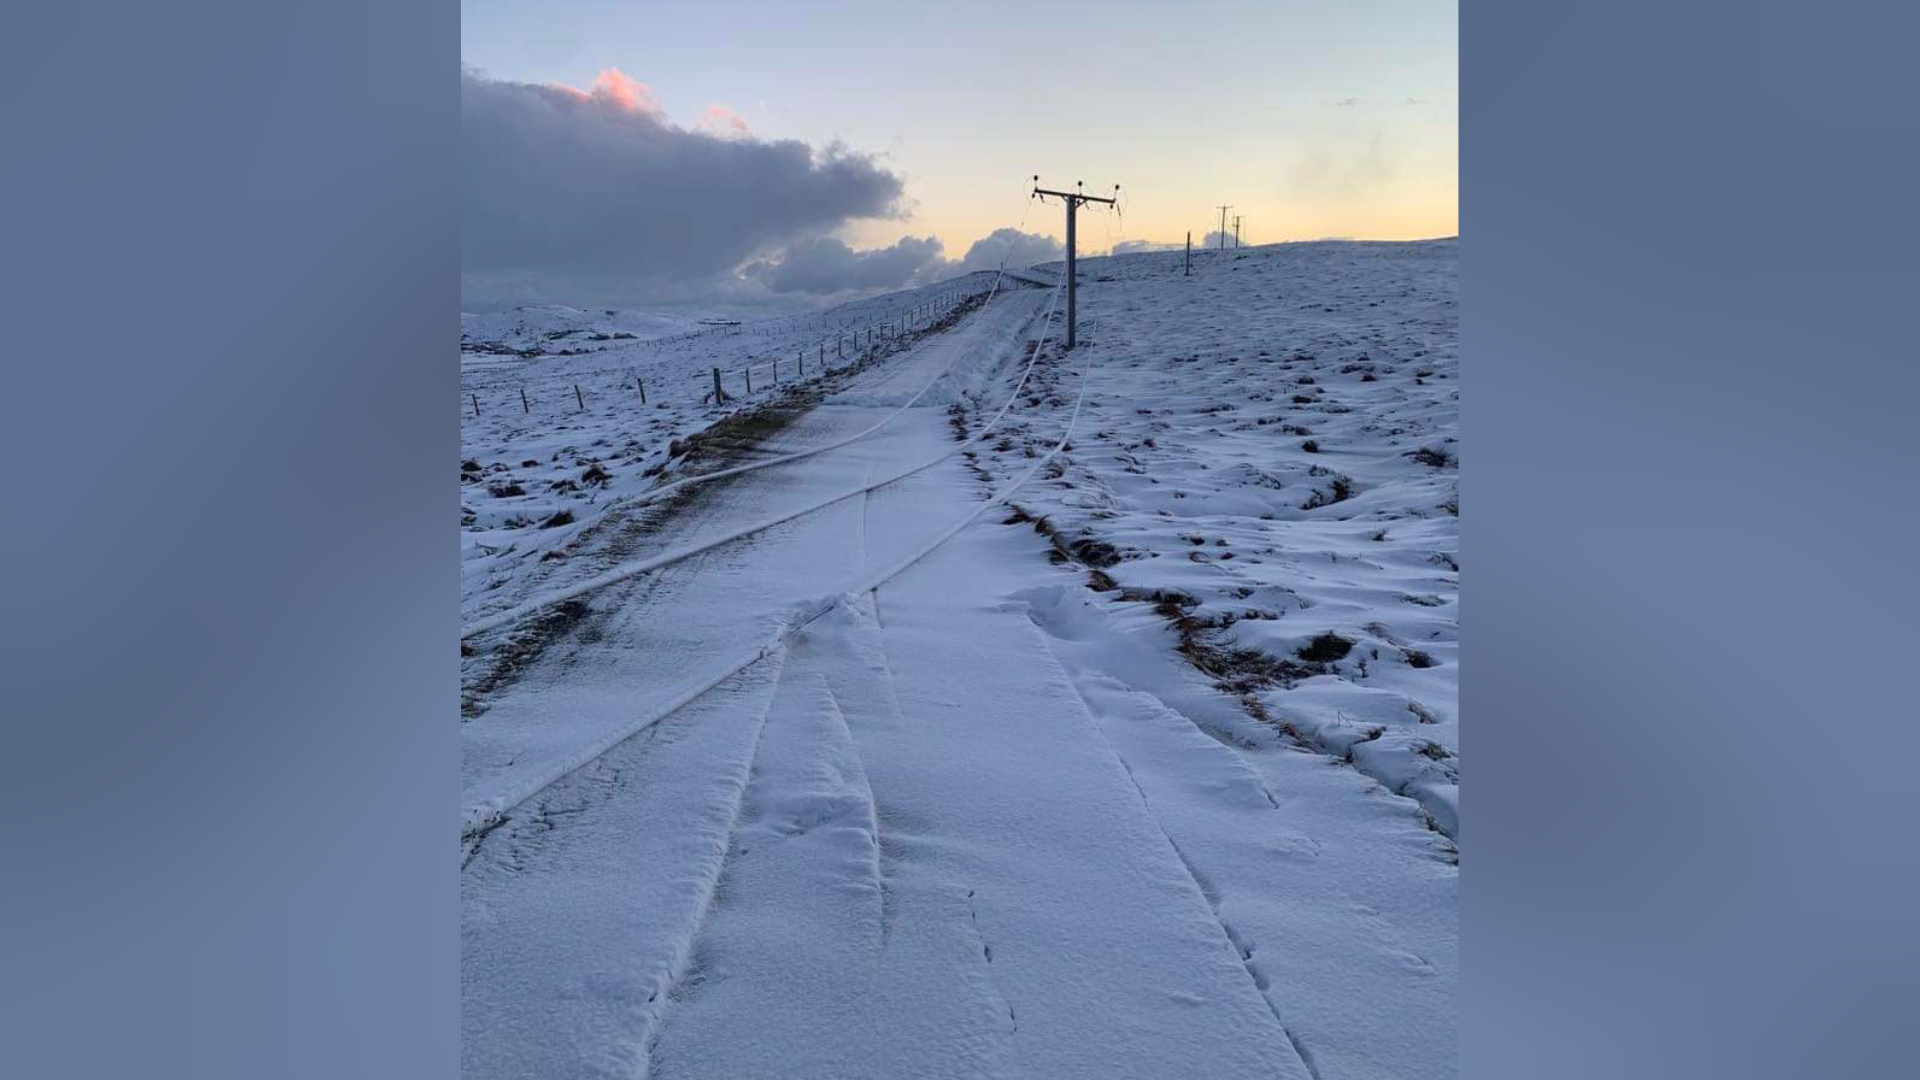 The power lines out in Shetland as a result of 'line icing'.